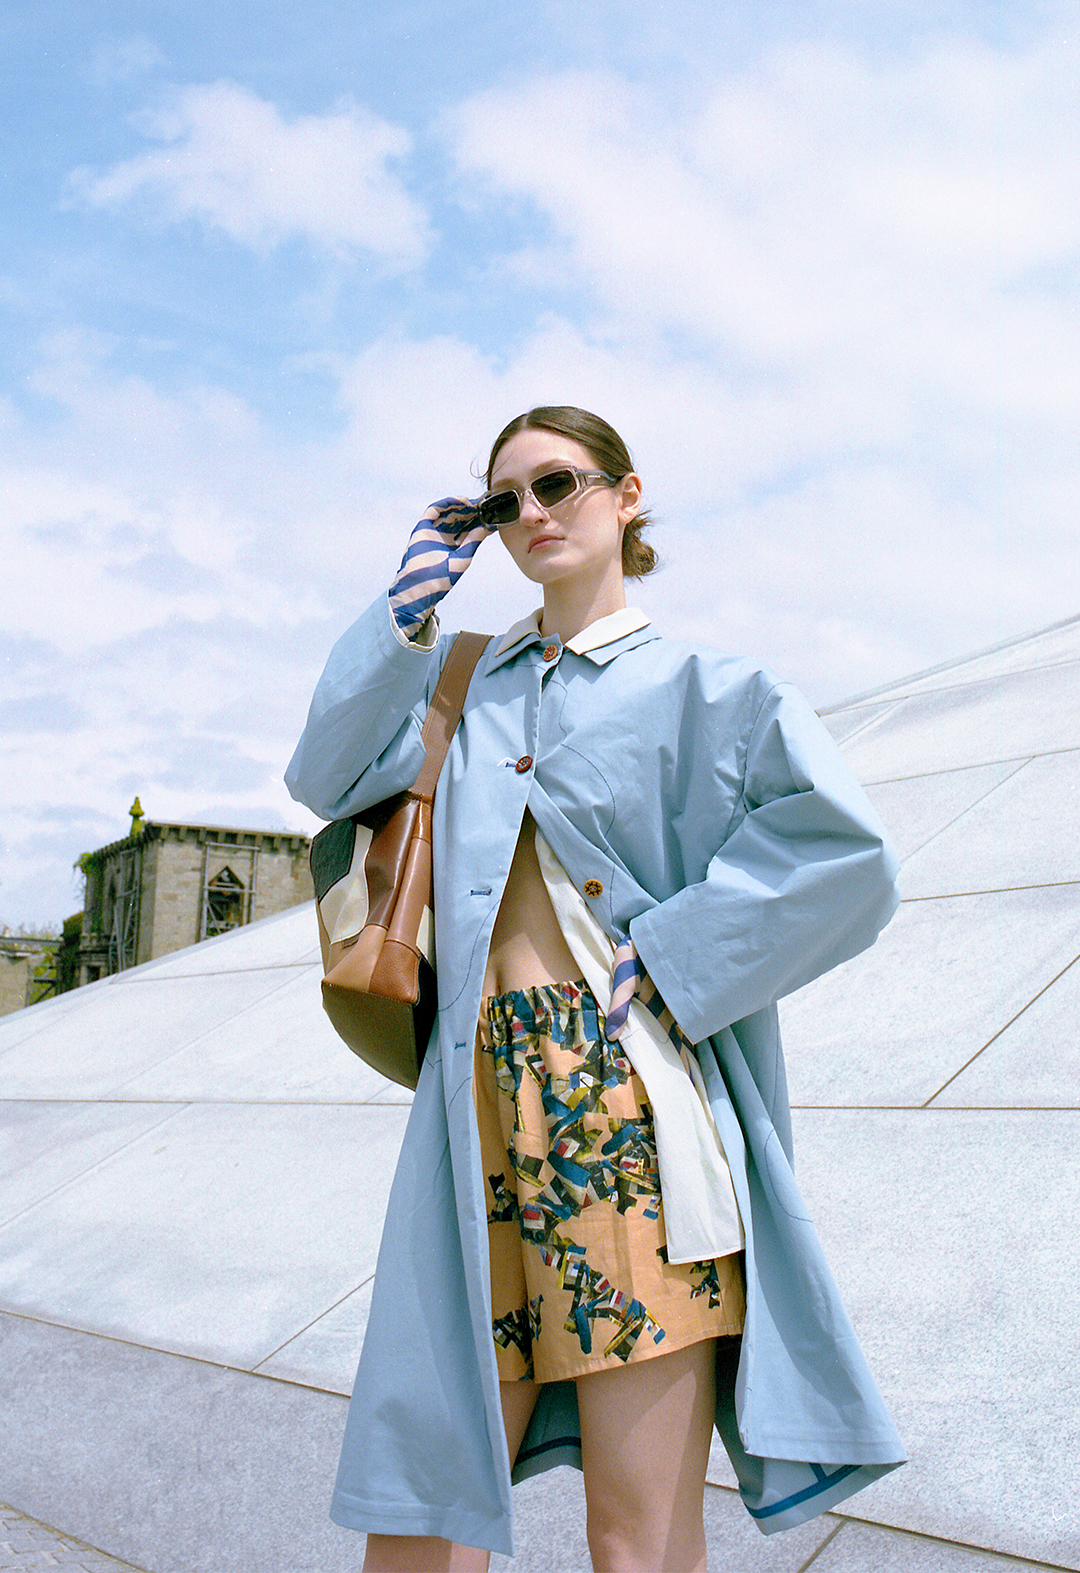 This is a long, blue oversized coat, with flower-inspired embroidery detail and ethnic wooden vintage buttons. Worn underneath with a green, embroidered oversized shirt and patchwork digital printed shorts. Accessorized with dark-blue mesh, long-sleeved gloves, sunglasses, and a handmade patchwork tote bag made out of recycled scrap leather. The model is posed with her hands above her head in front of a gray wall.